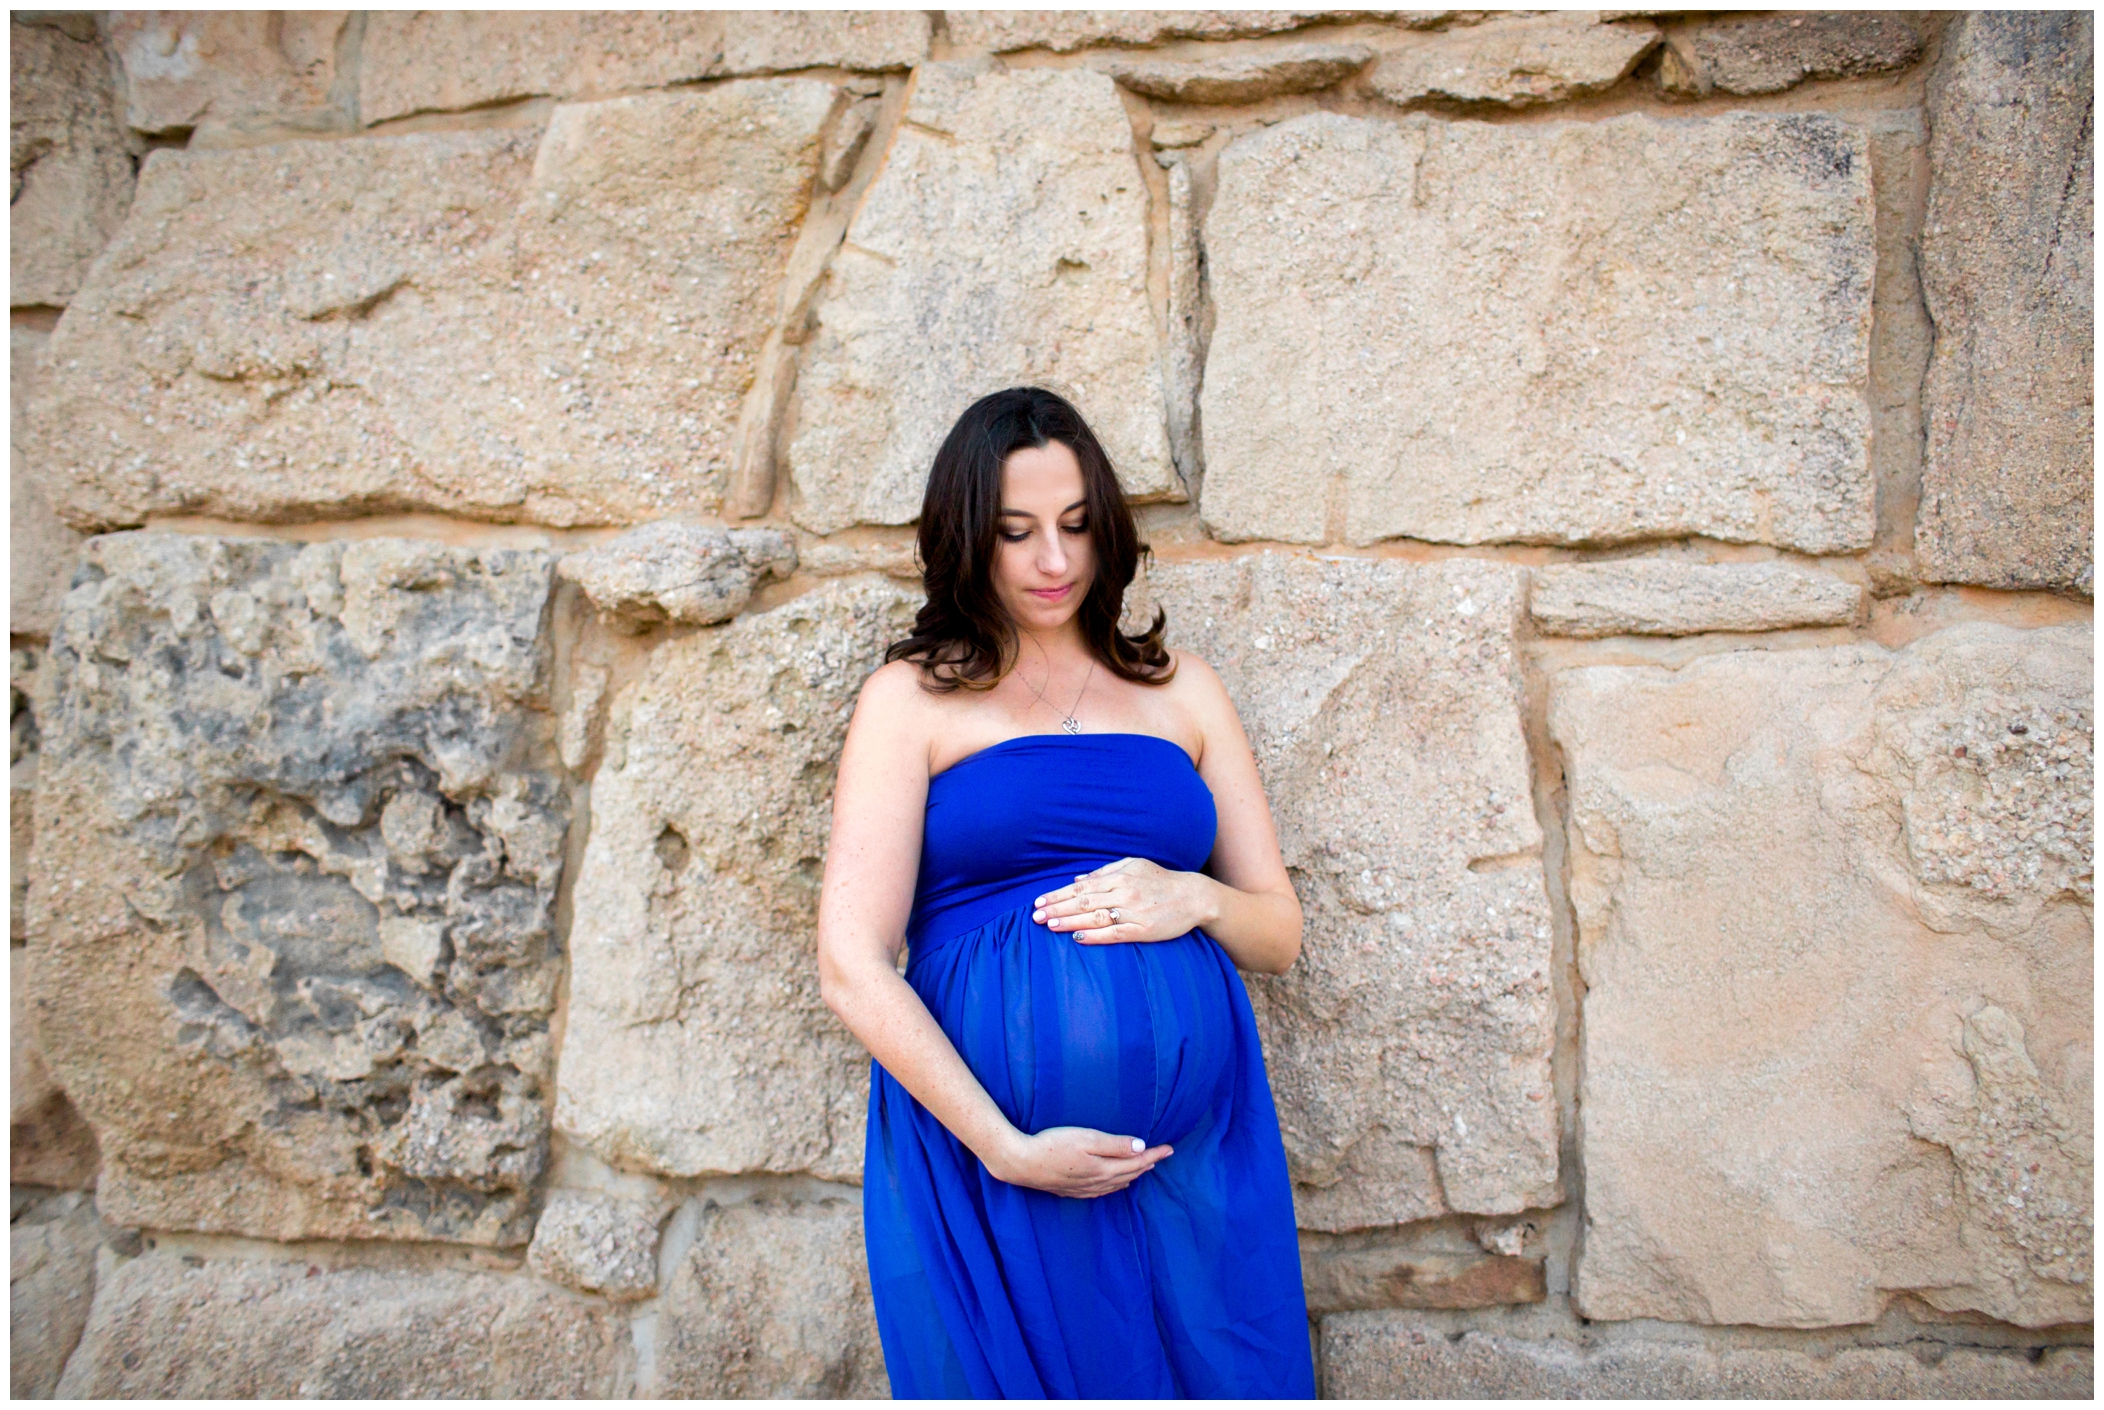 Boulder maternity photos by Plum Pretty Photography 